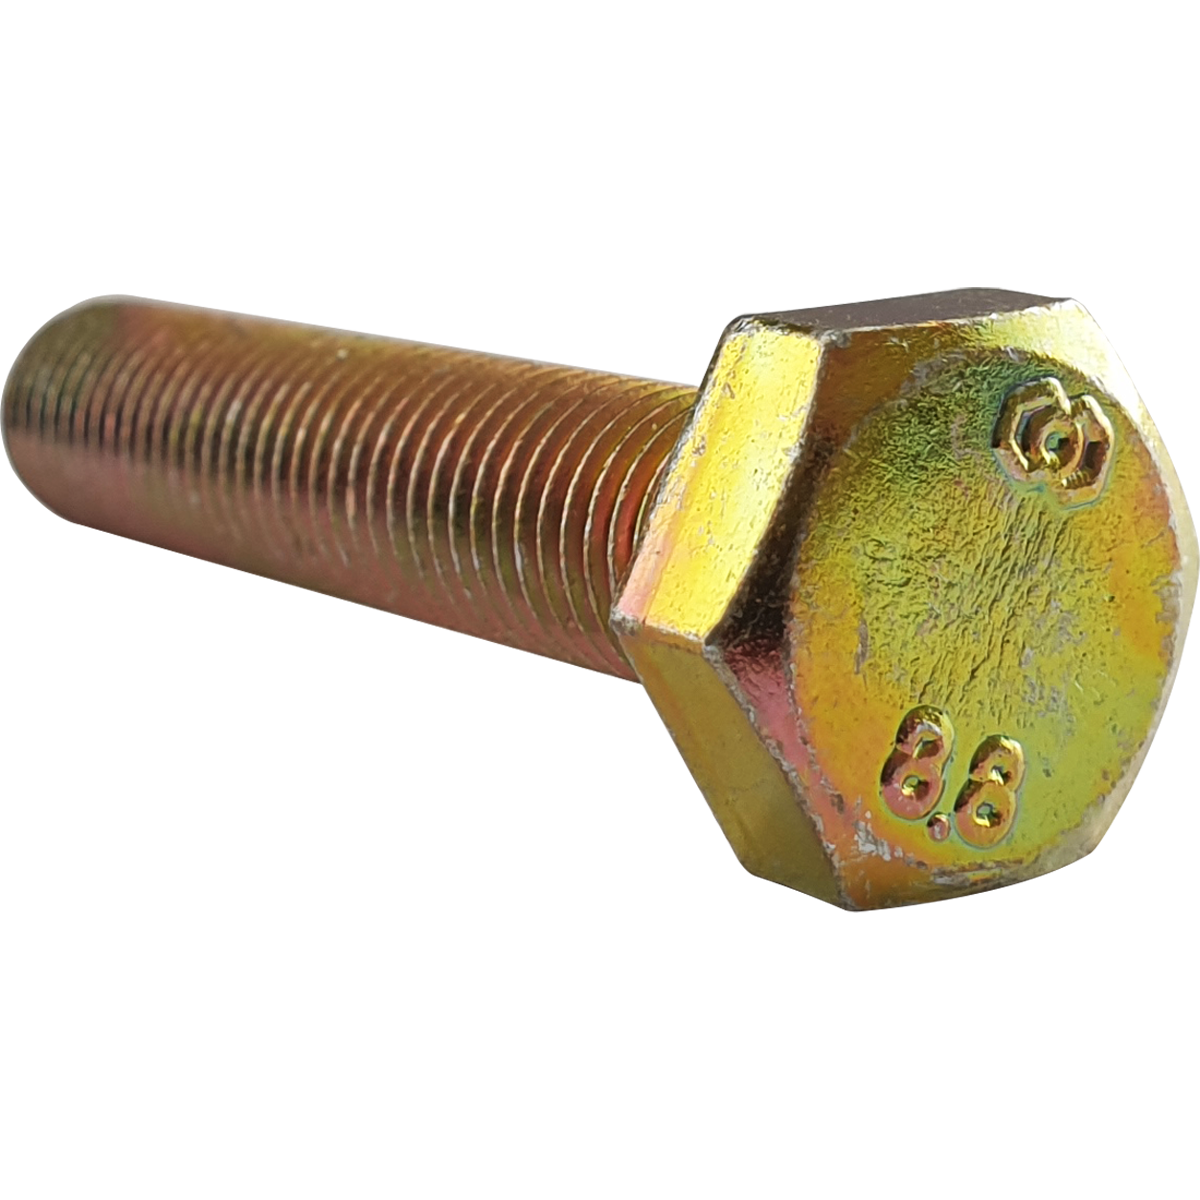 Metric extra fine zinc plated fully threaded hex set screw. Available in a variety of sizes with bulk discounts available.